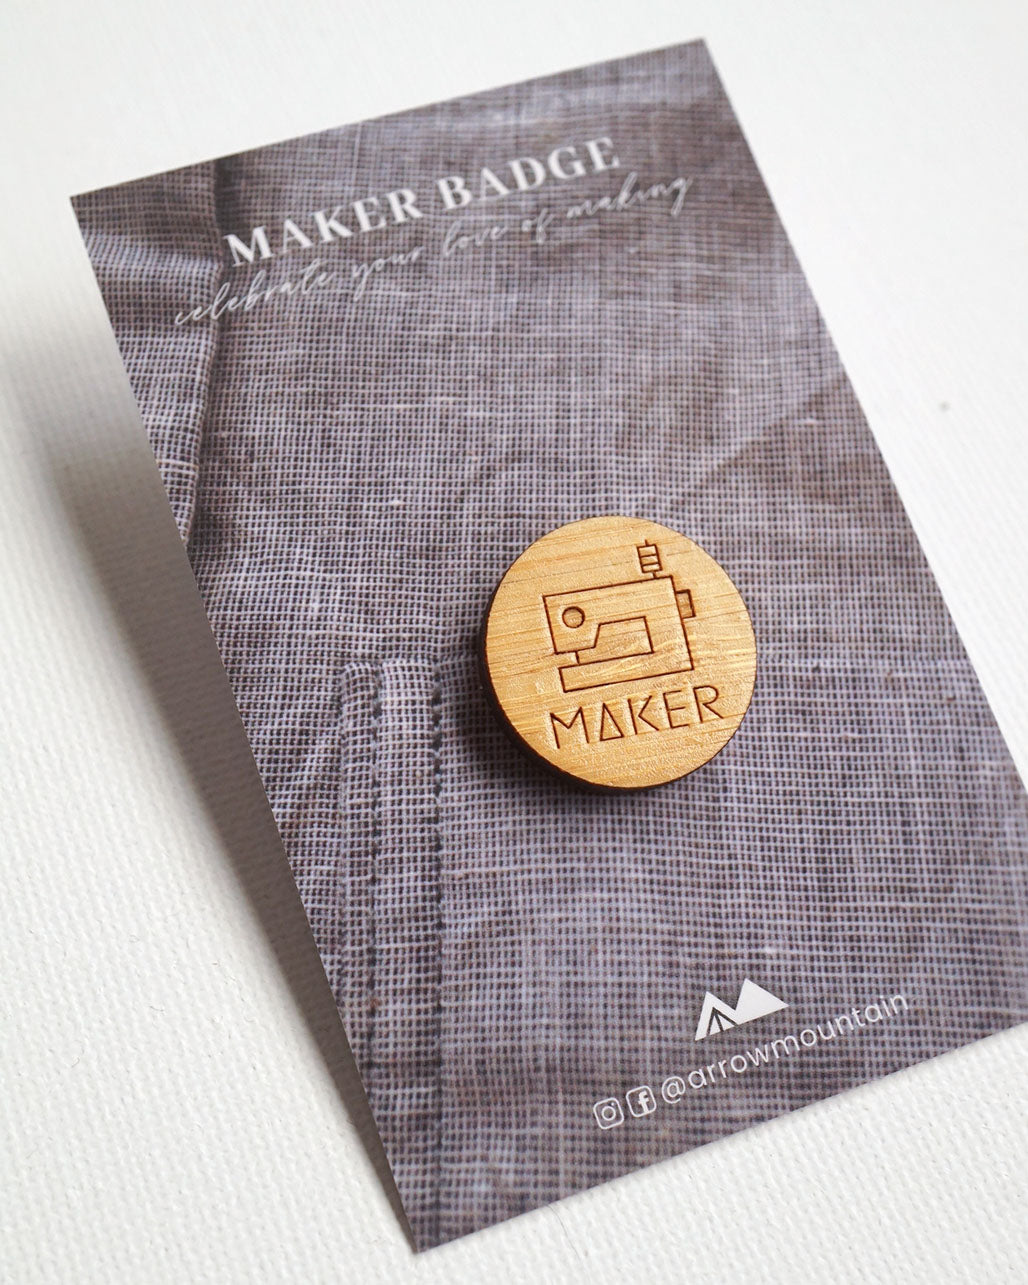 The Maker Badge - Sewing